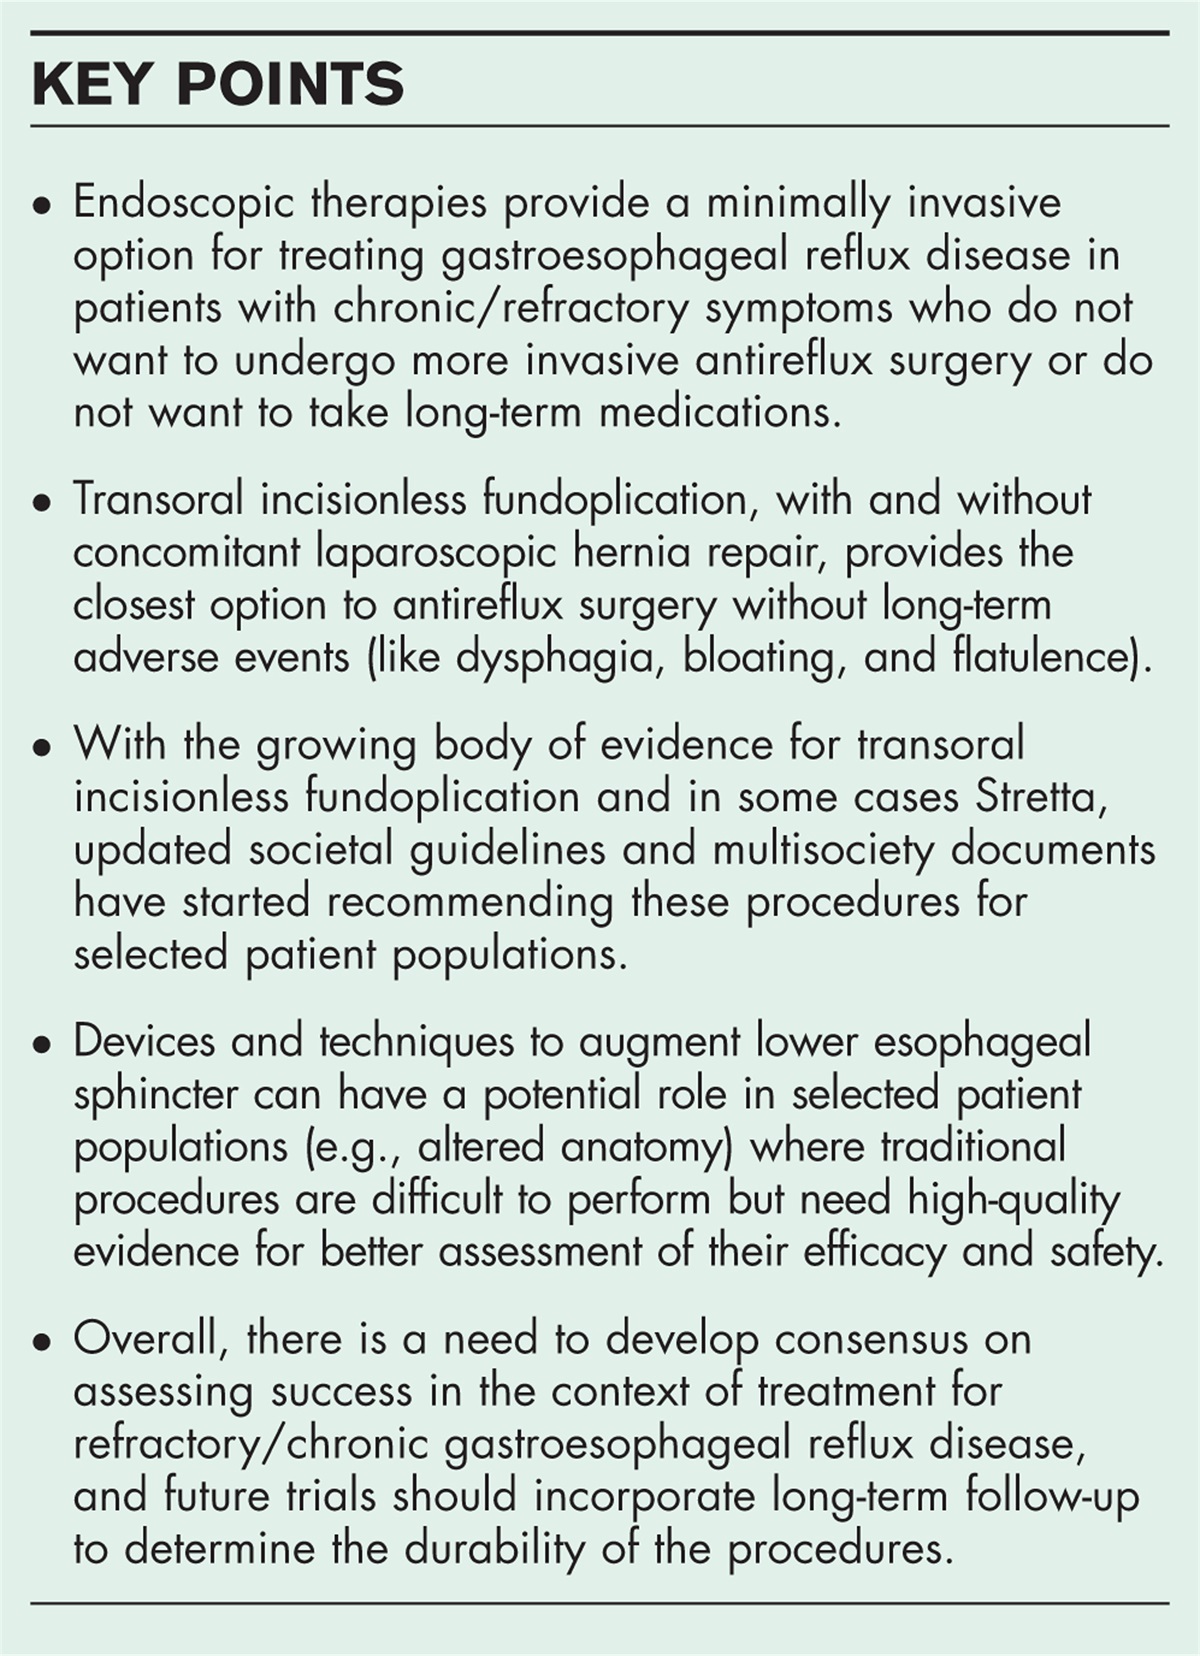 Endoscopic therapy for gastroesophageal reflux disease: where are we, where are we going?